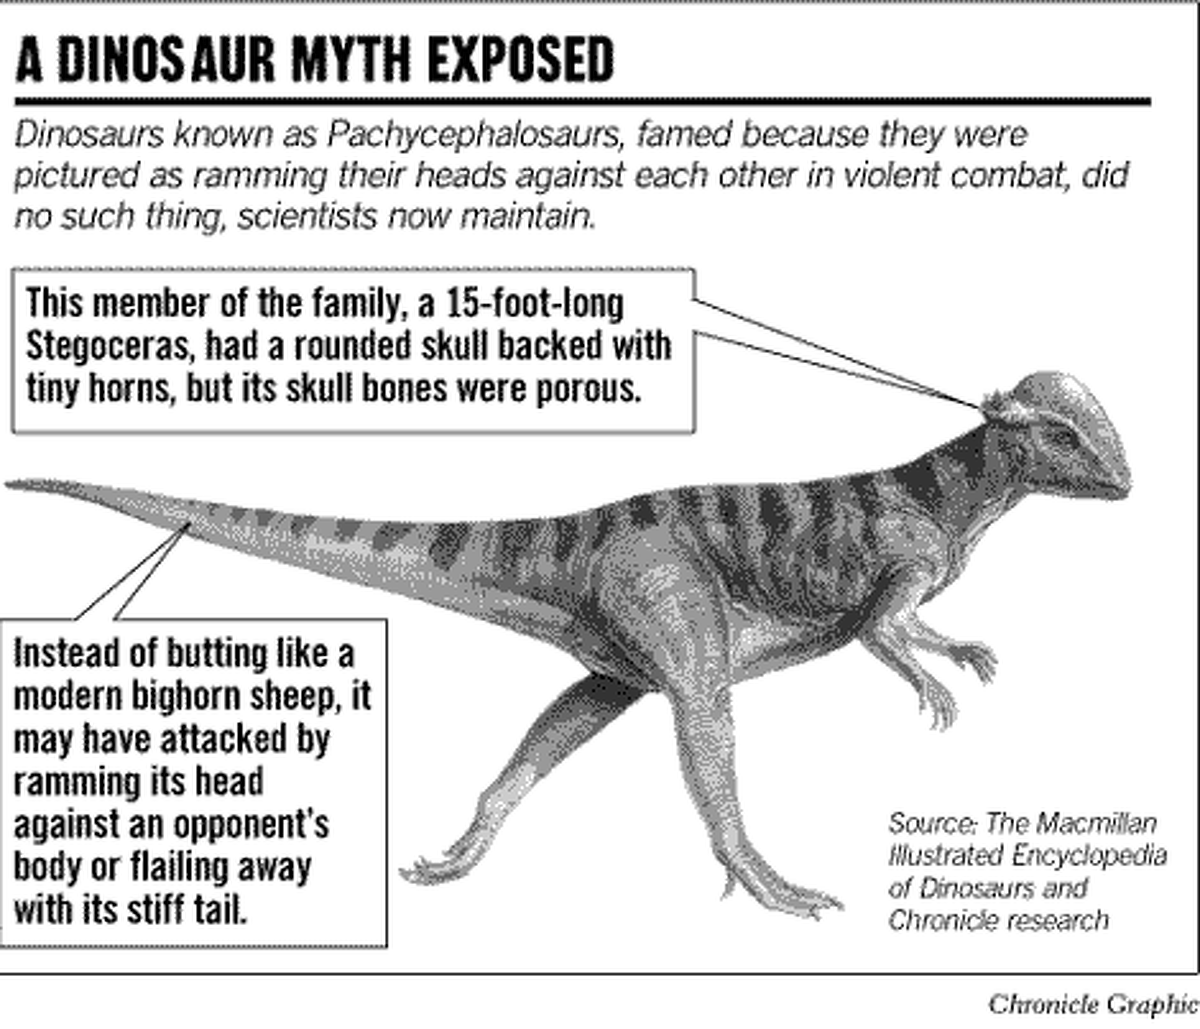 Dinosaur Study Makes No Butts About It Round Skull Species Didn T Bash Heads